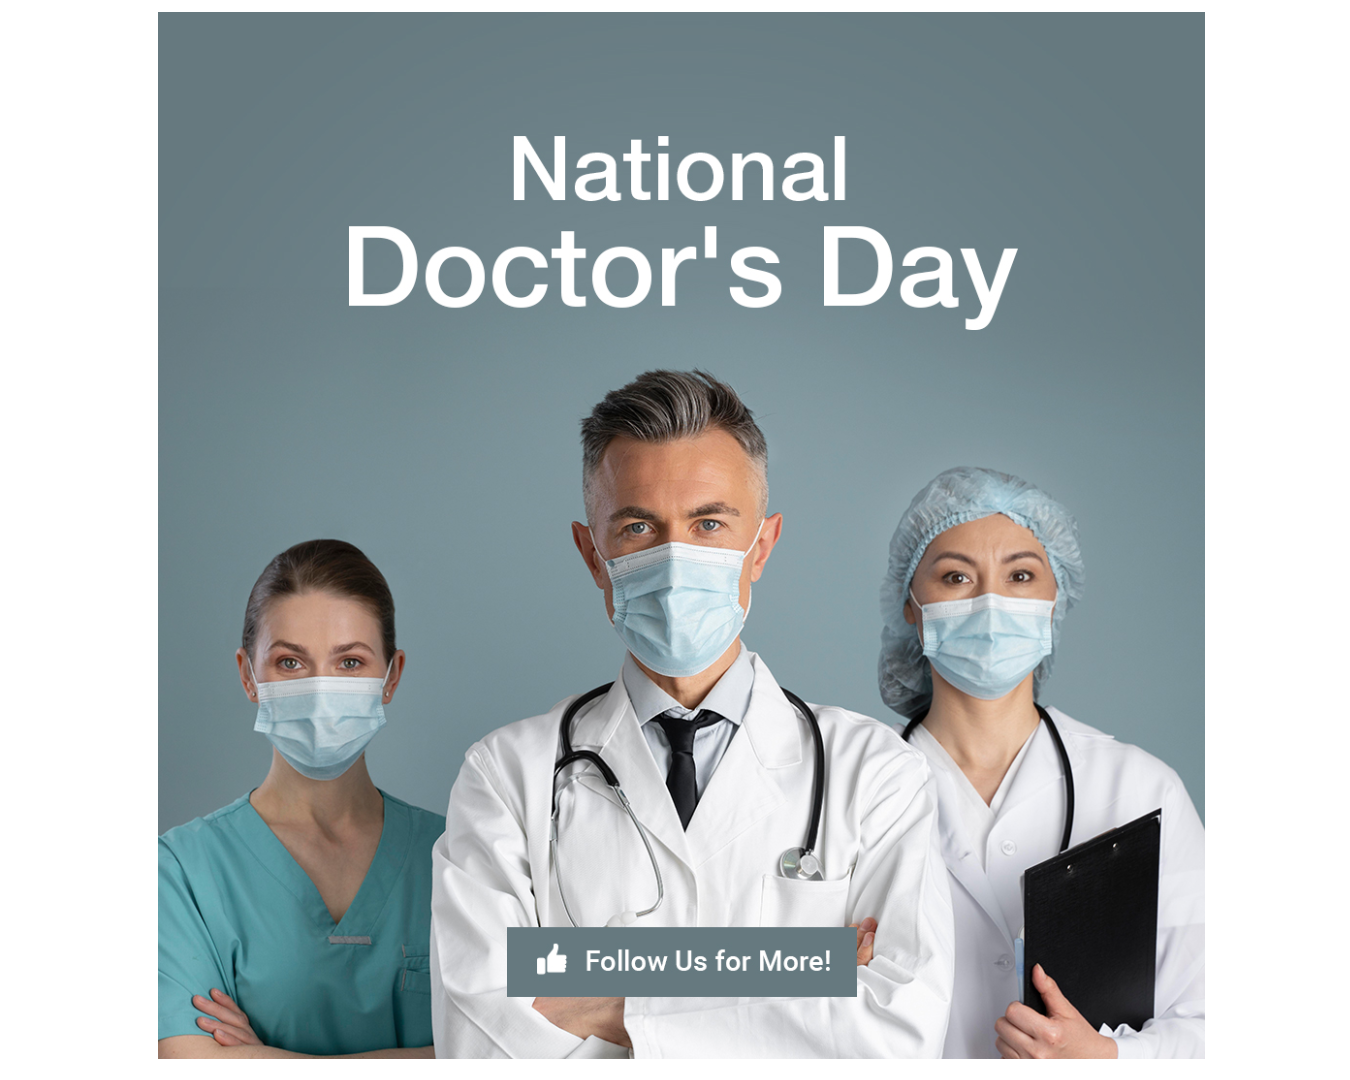 National Doctor's Day celebrating healthcare heroes